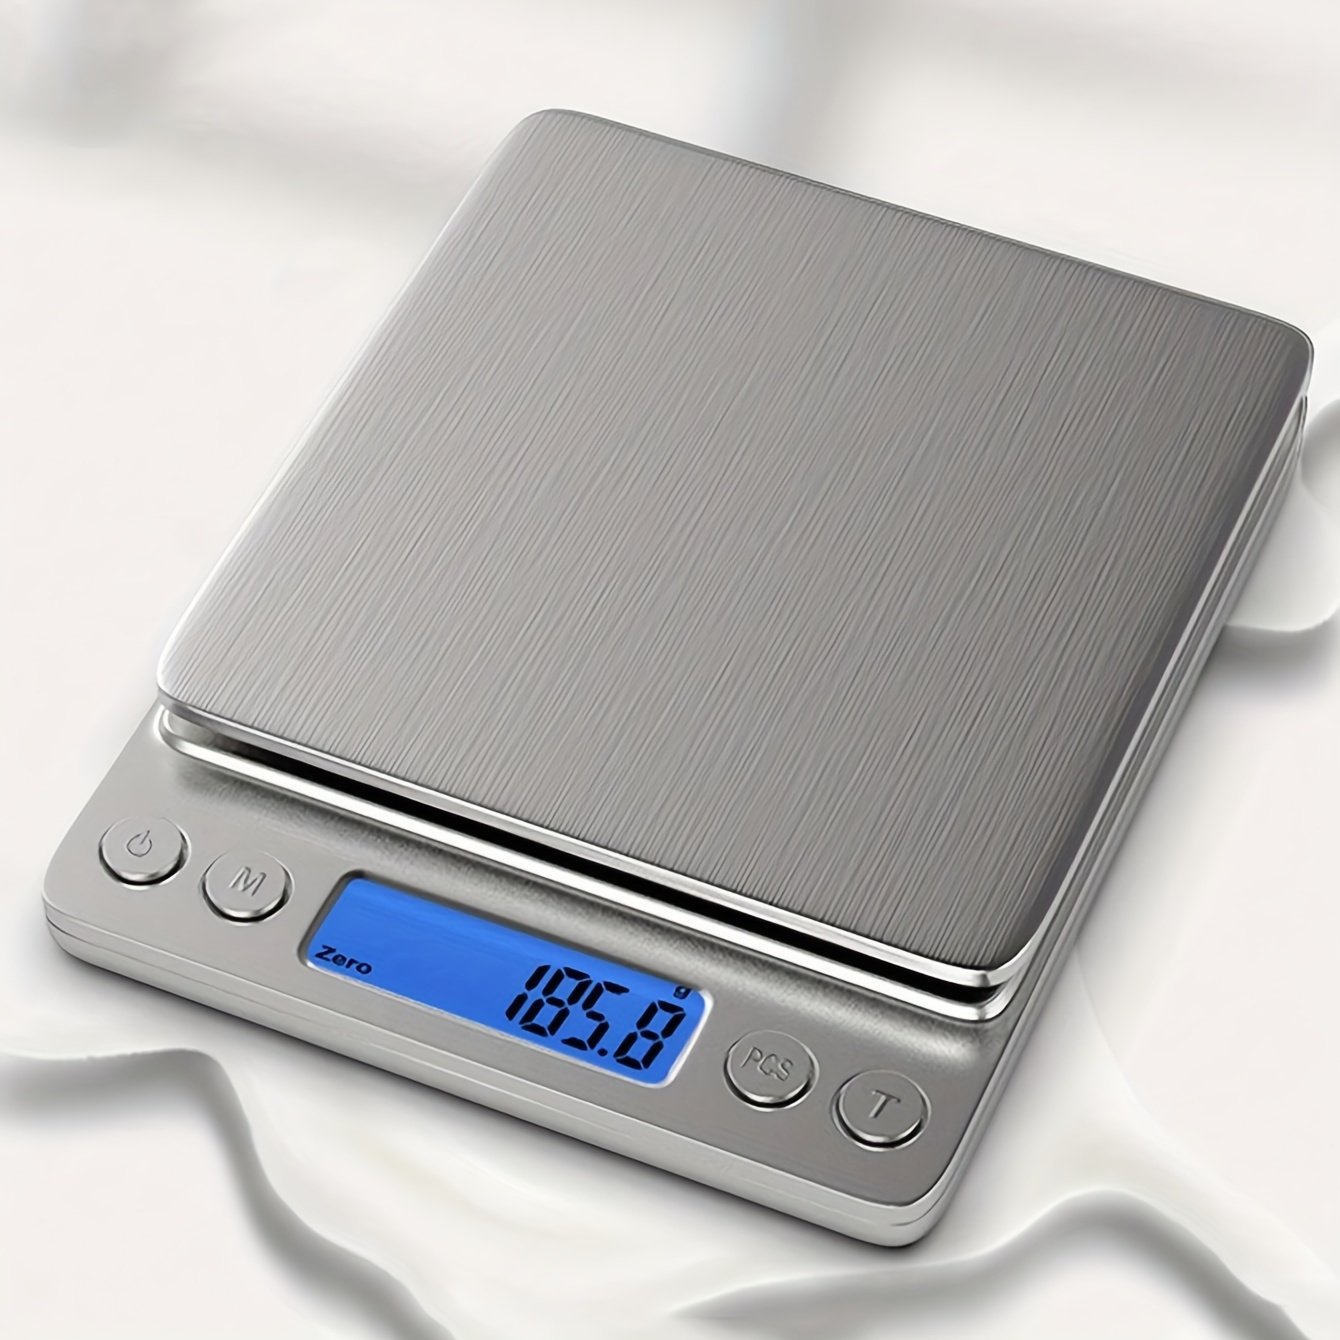  Electronic Scale,Digital Kitchen Weighing Scales